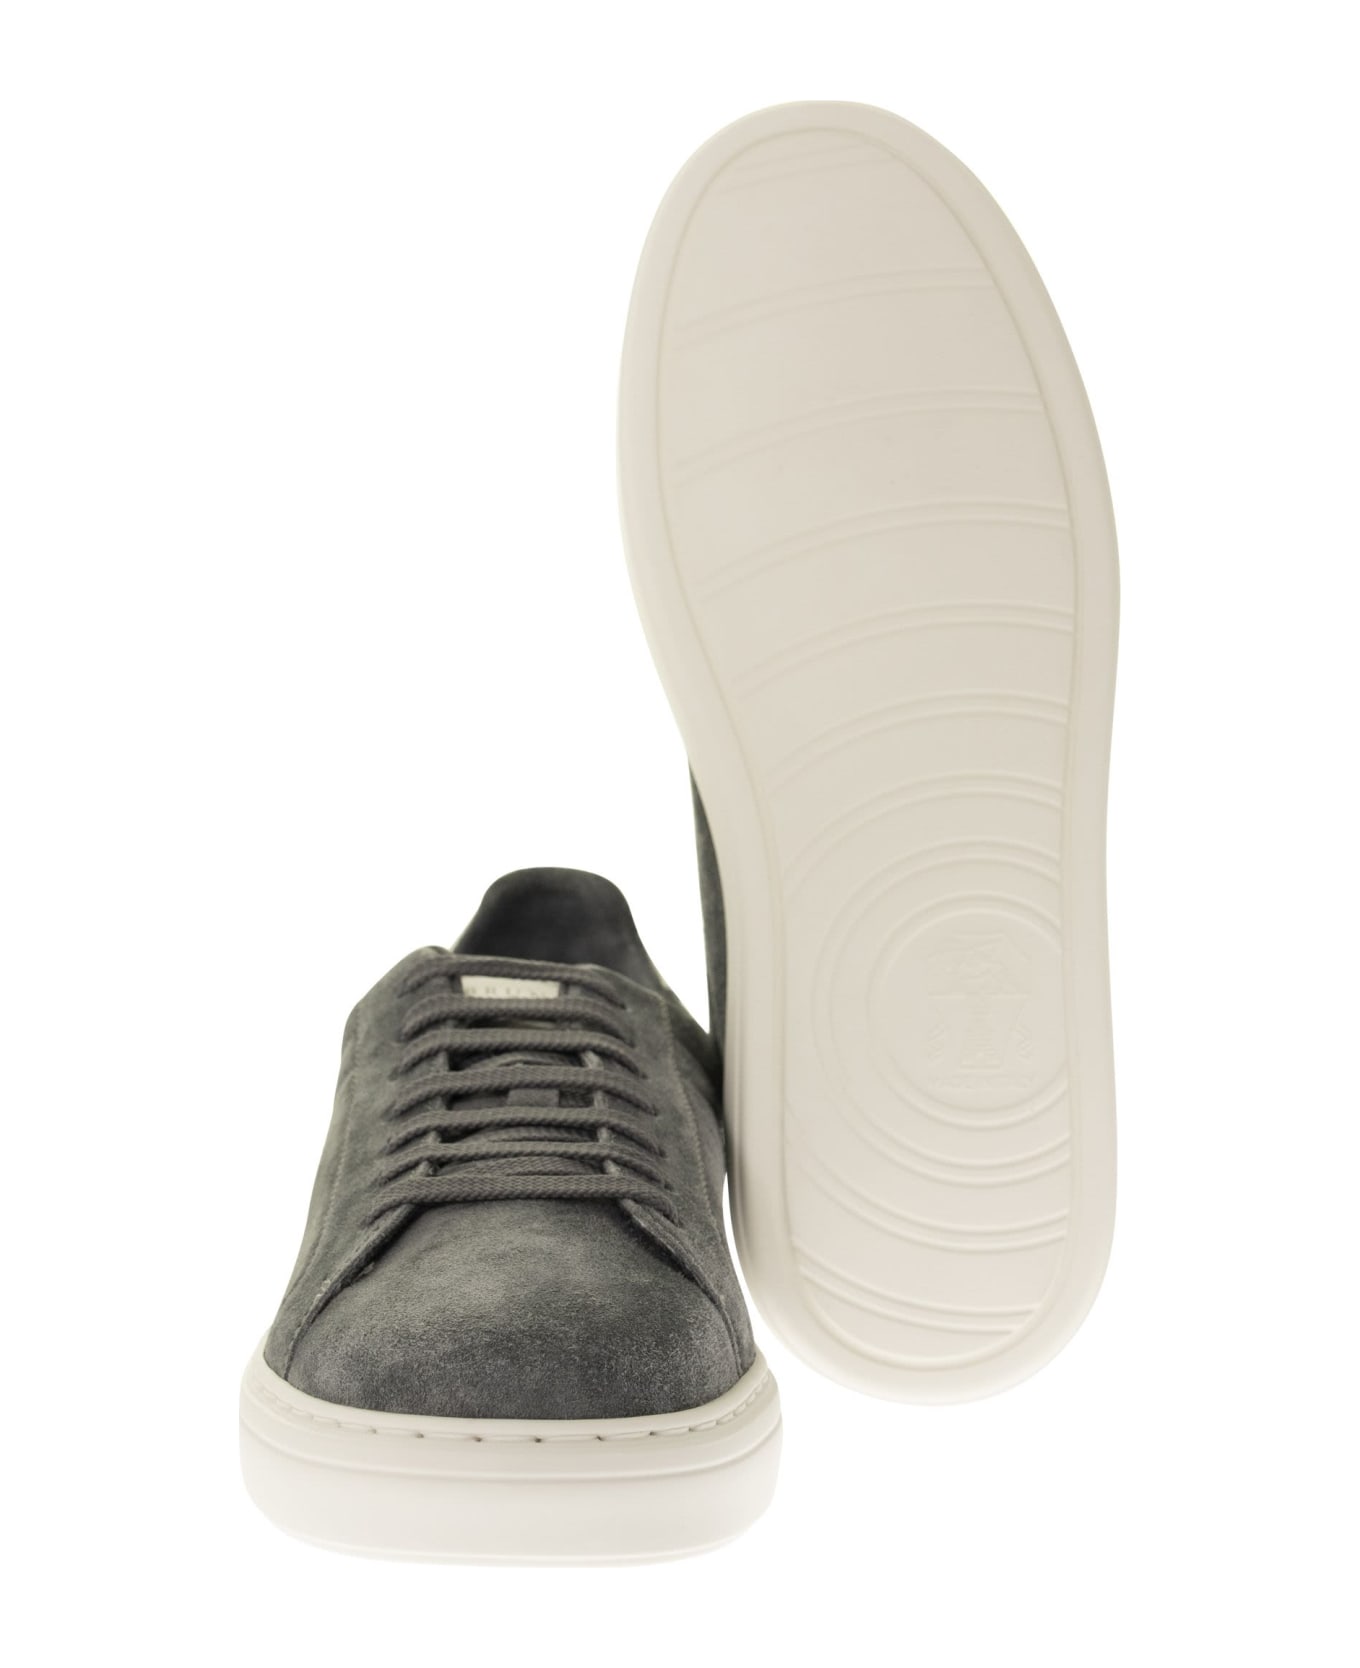 Brunello Cucinelli Washed Suede Sneakers - Grey